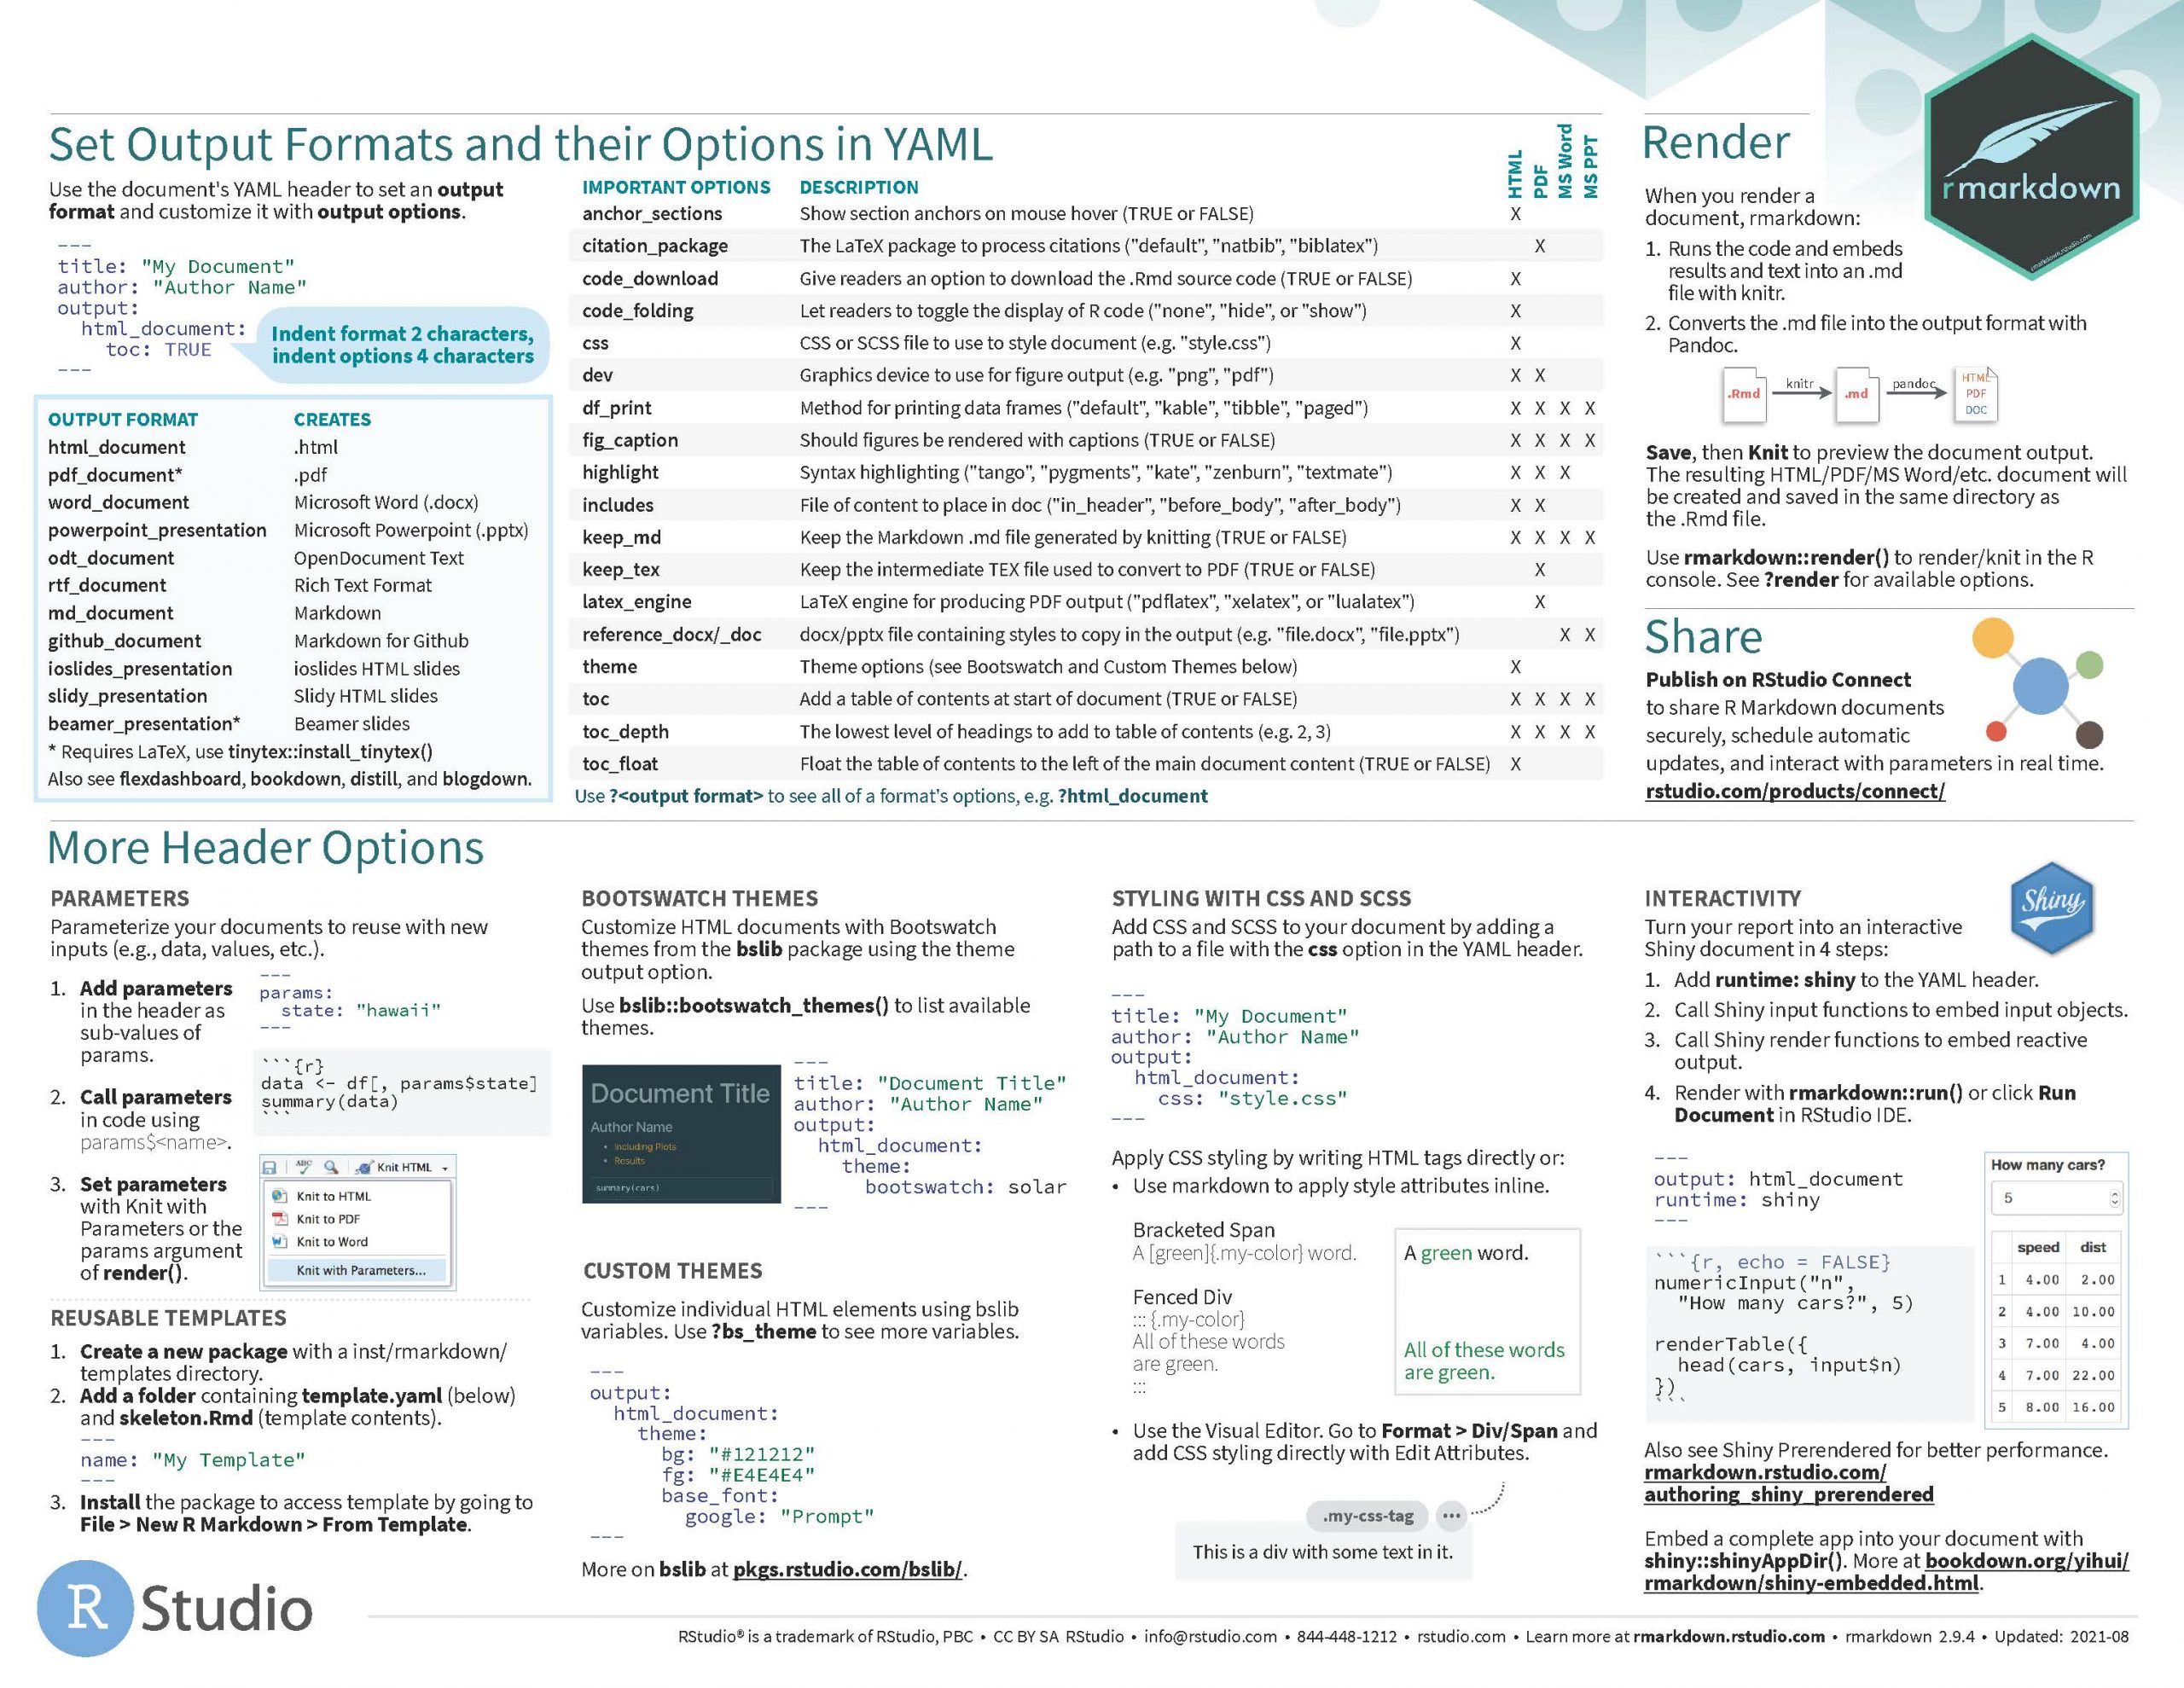 The second page of an R Markdown cheatsheet with key commands, code and options.